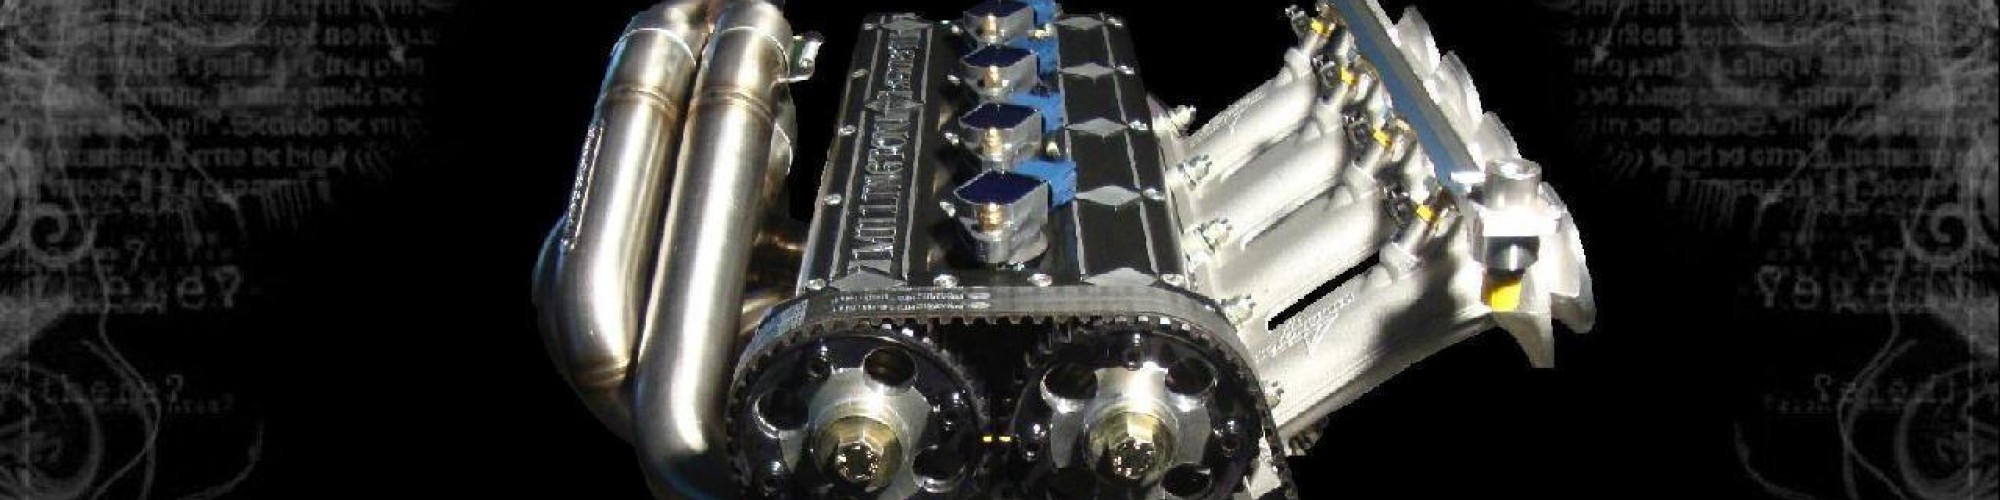 Millington Racing Engines cover image